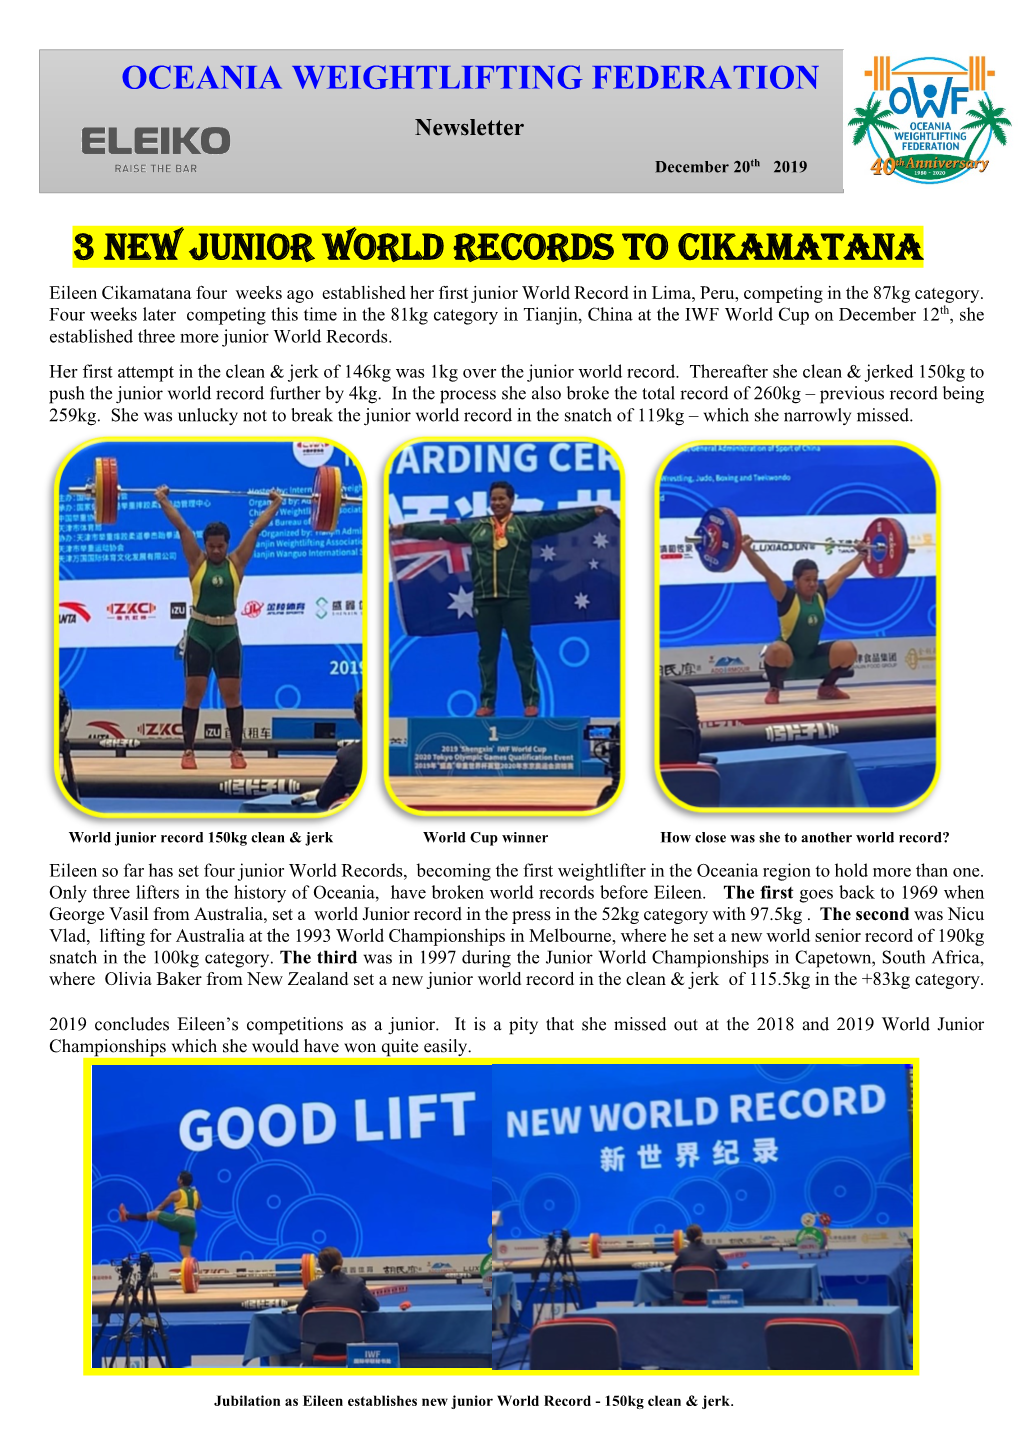 3 NEW JUNIOR WORLD RECORDS to CIKAMATANA Eileen Cikamatana Four Weeks Ago Established Her First Junior World Record in Lima, Peru, Competing in the 87Kg Category